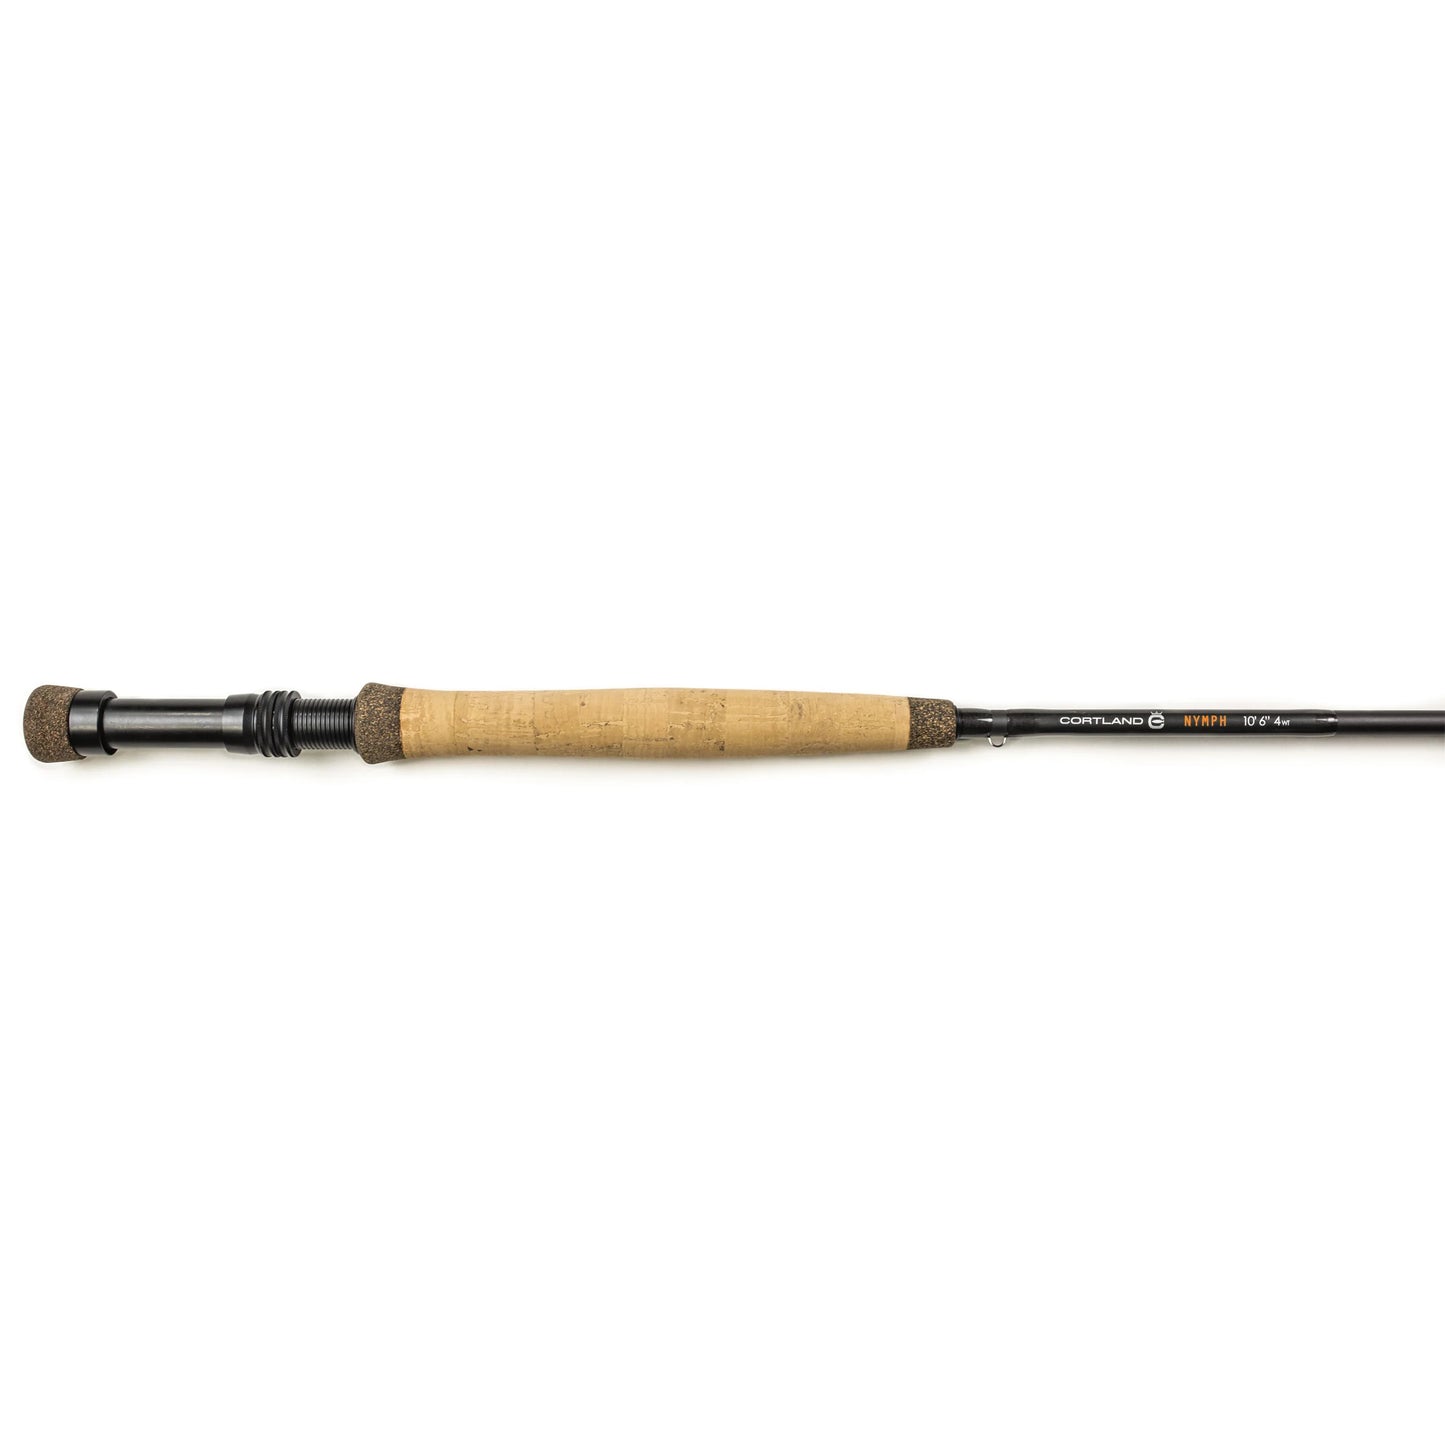 Cortland Nymph Series Fly Rods